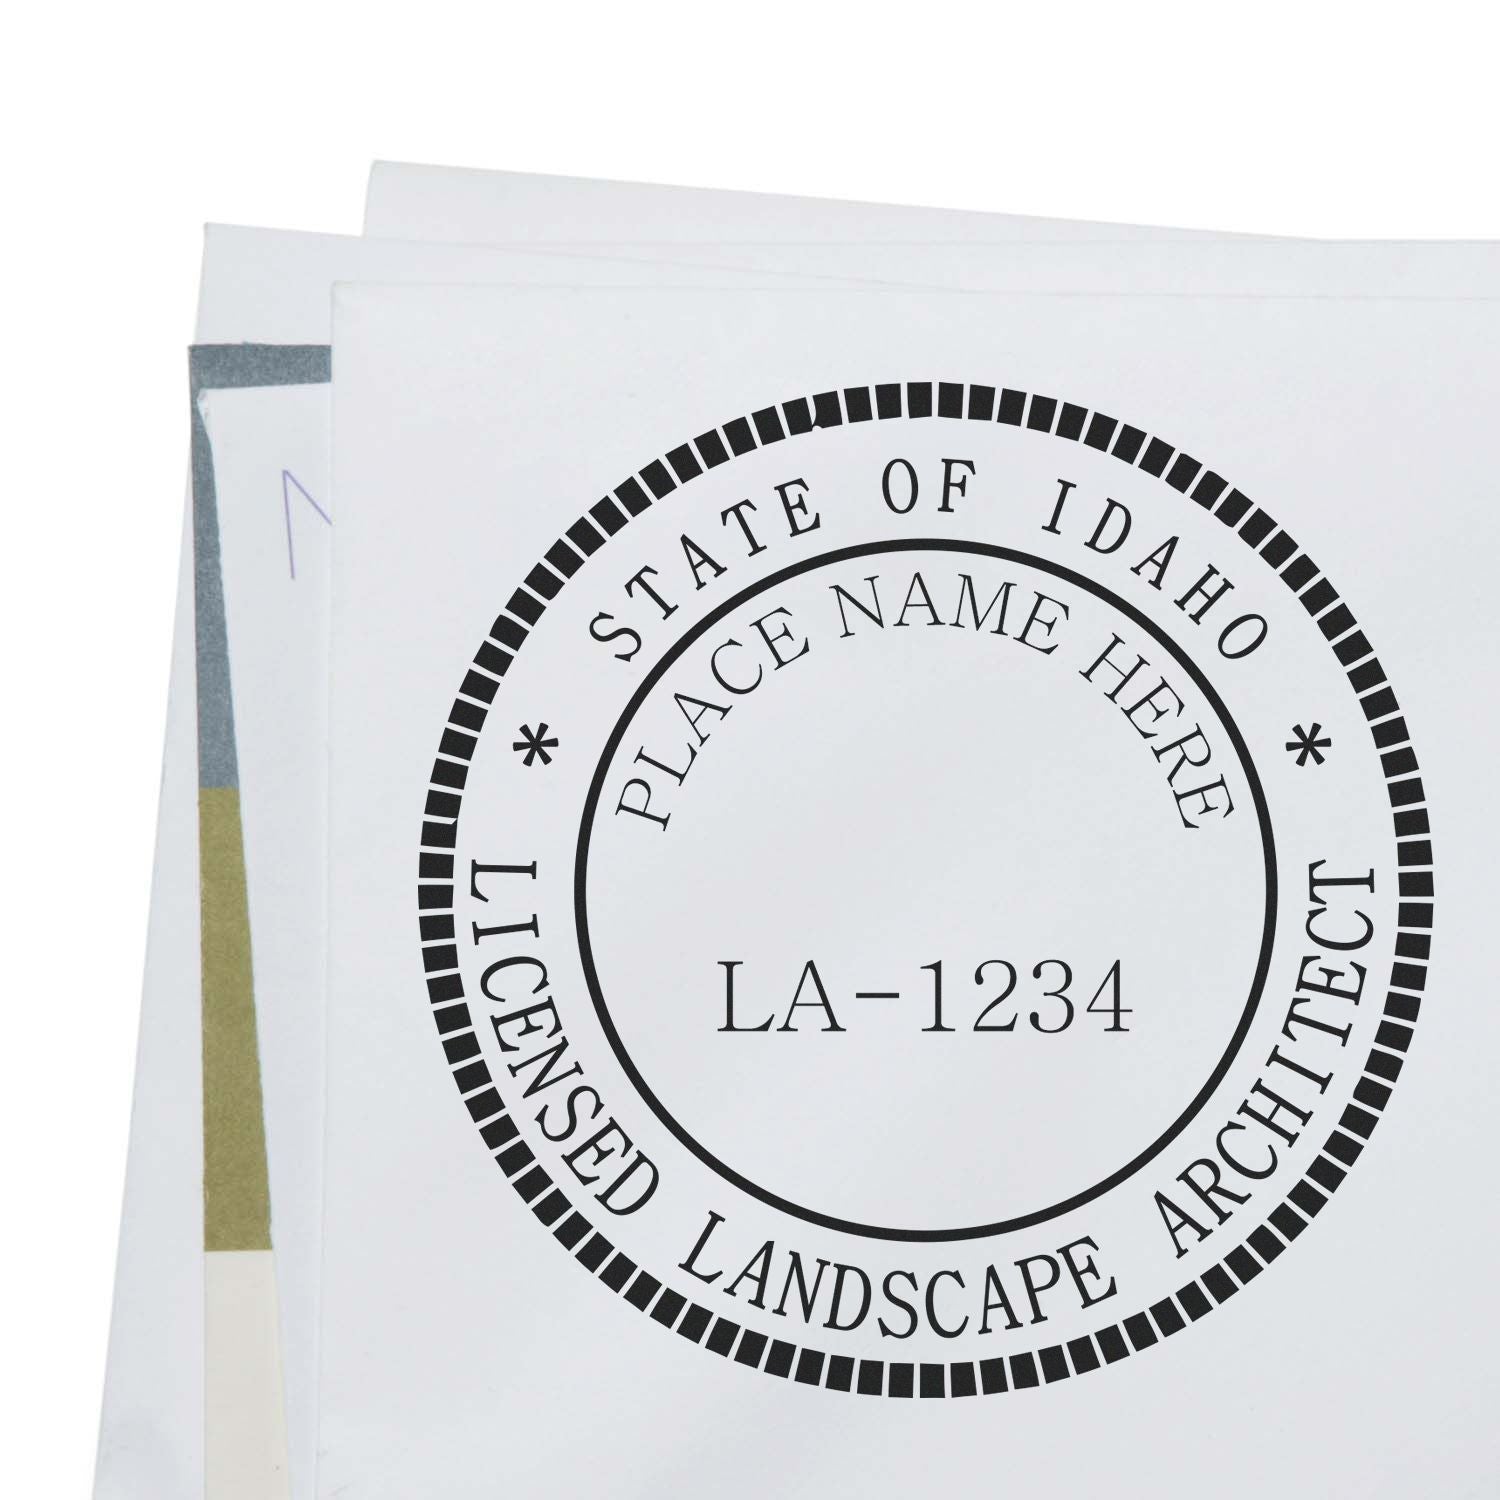 The main image for the Digital Idaho Landscape Architect Stamp depicting a sample of the imprint and electronic files